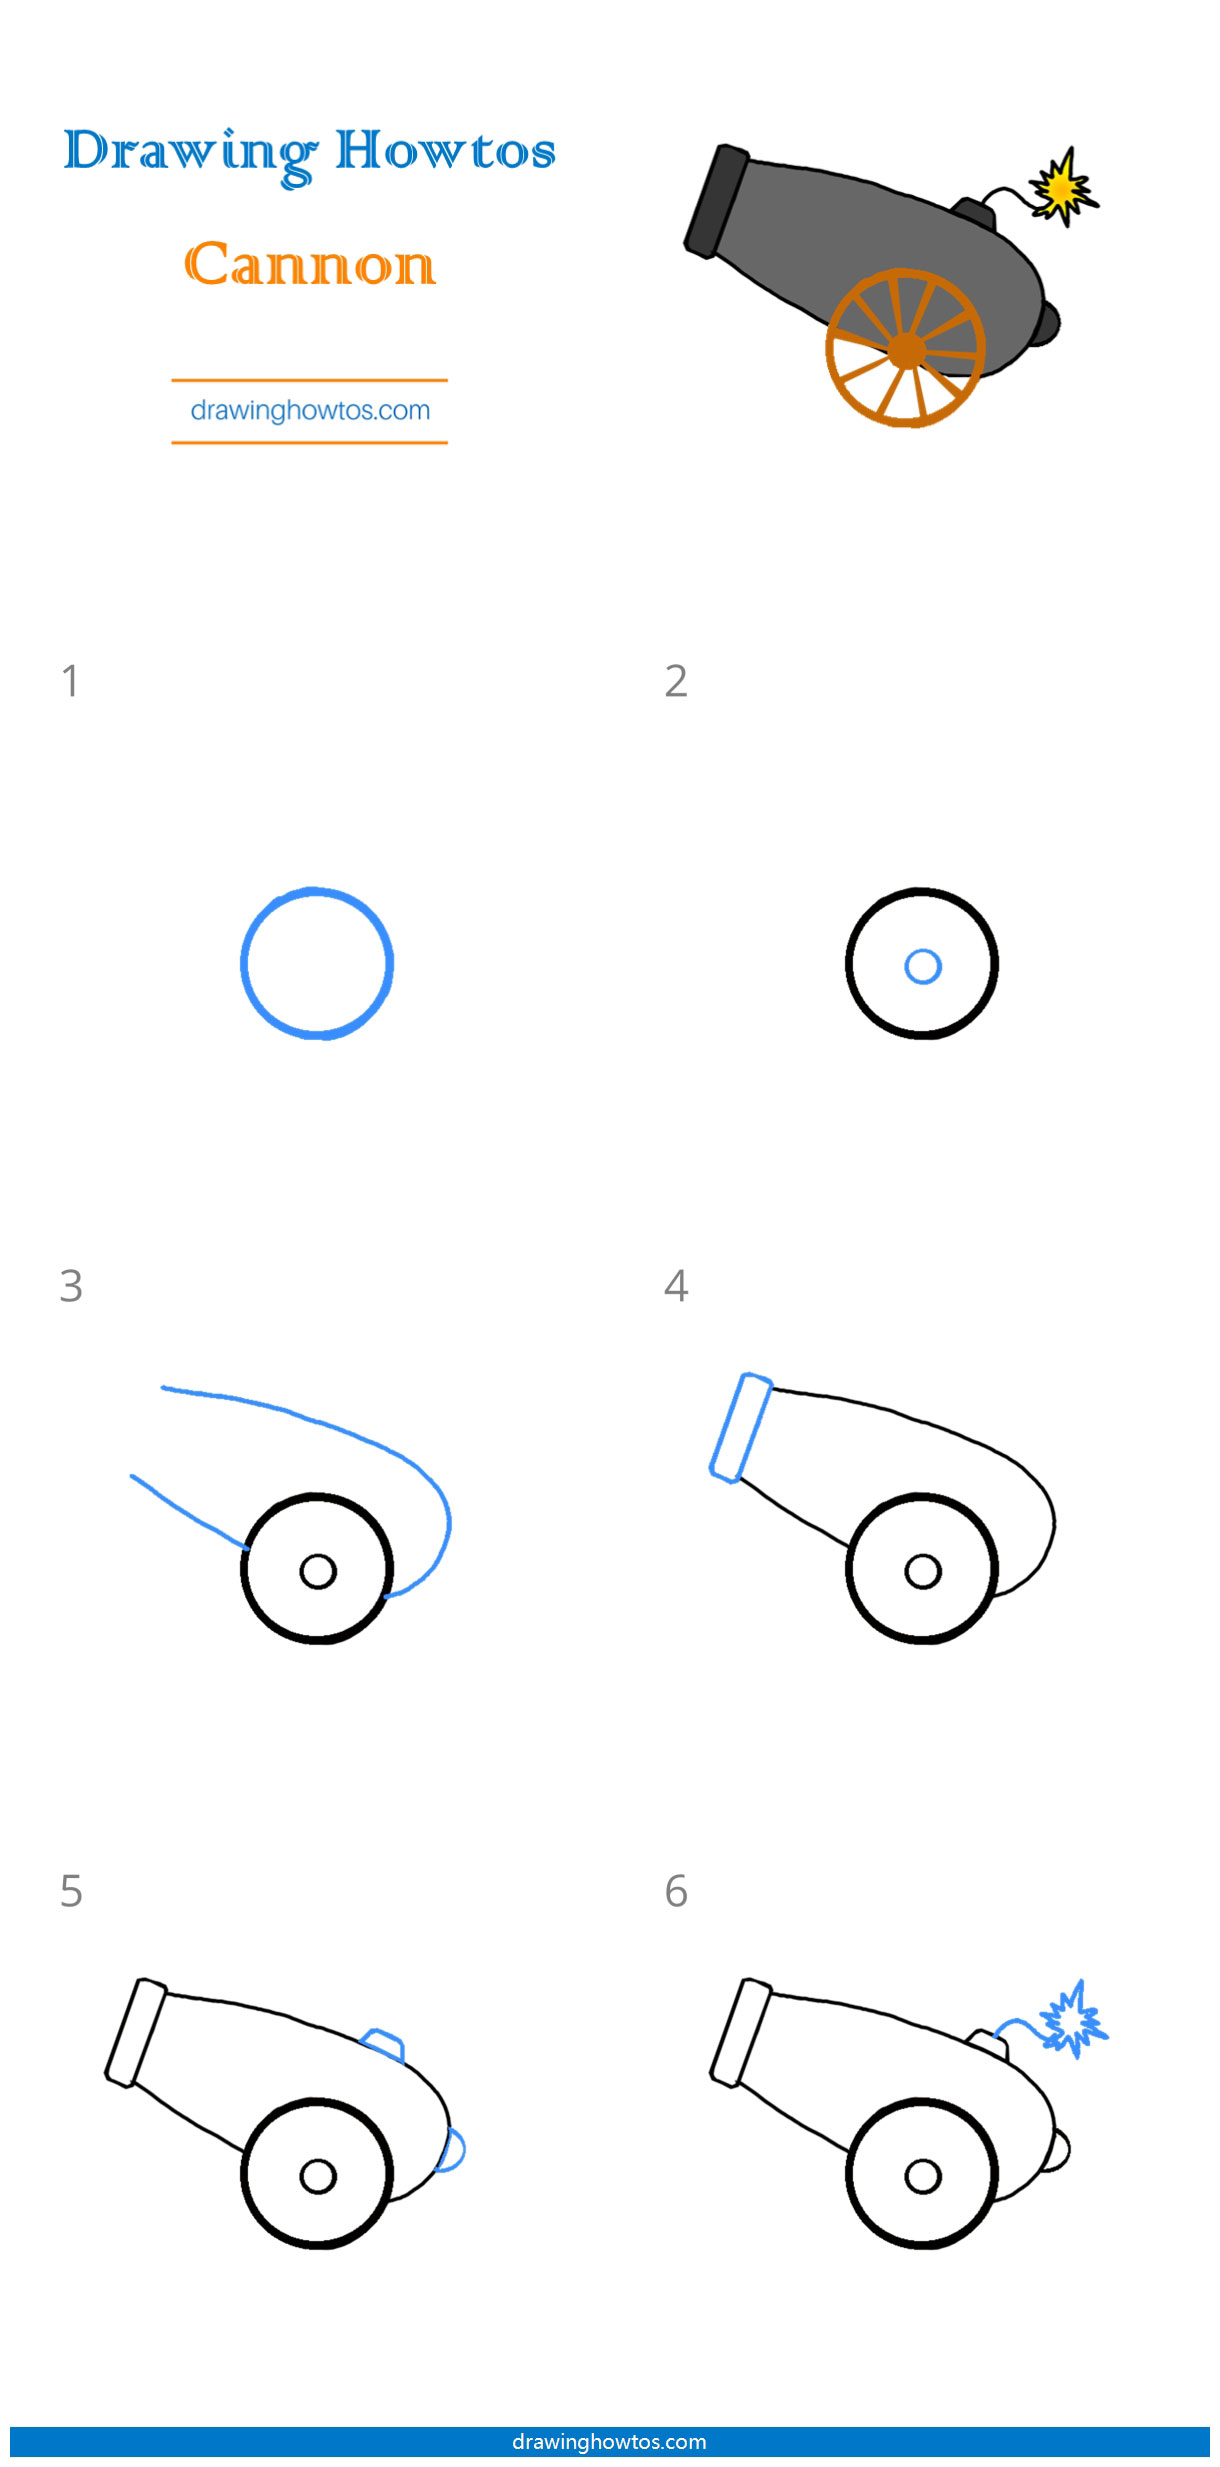 How to Draw a Cannon Step by Step